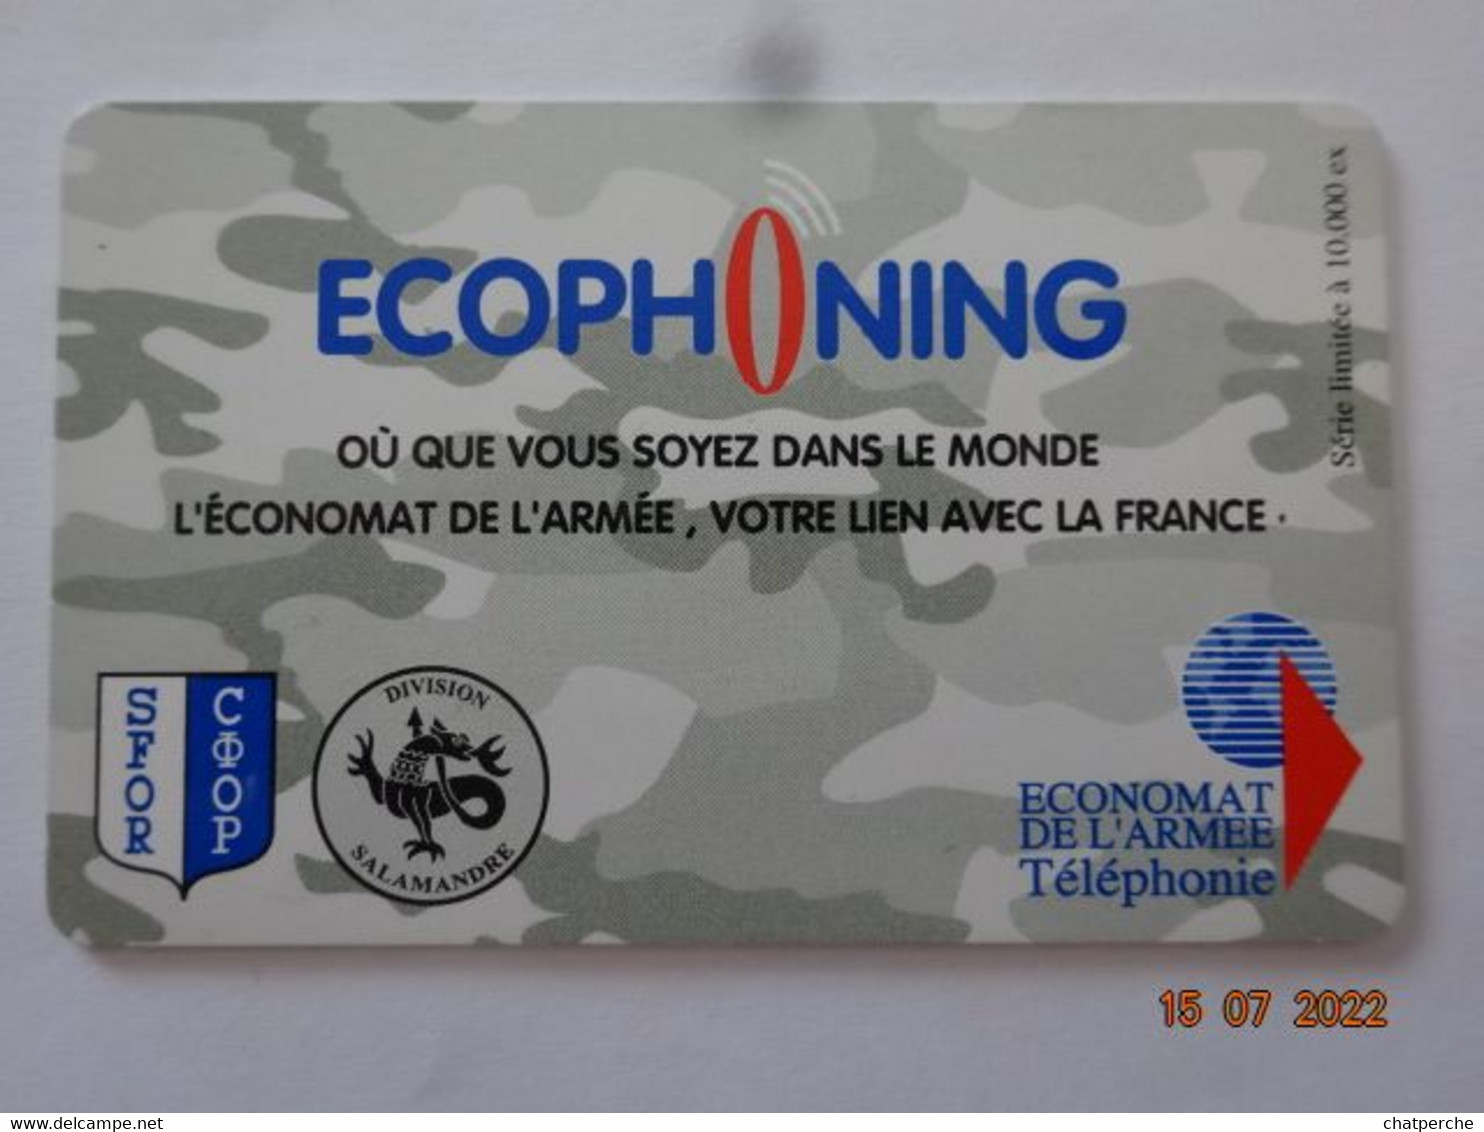 CARTE A USAGE MILITAIRE CARTE INTERNET ECOPHONING SFOR / COOP DIVISION SALAMANDRE - Military Phonecards